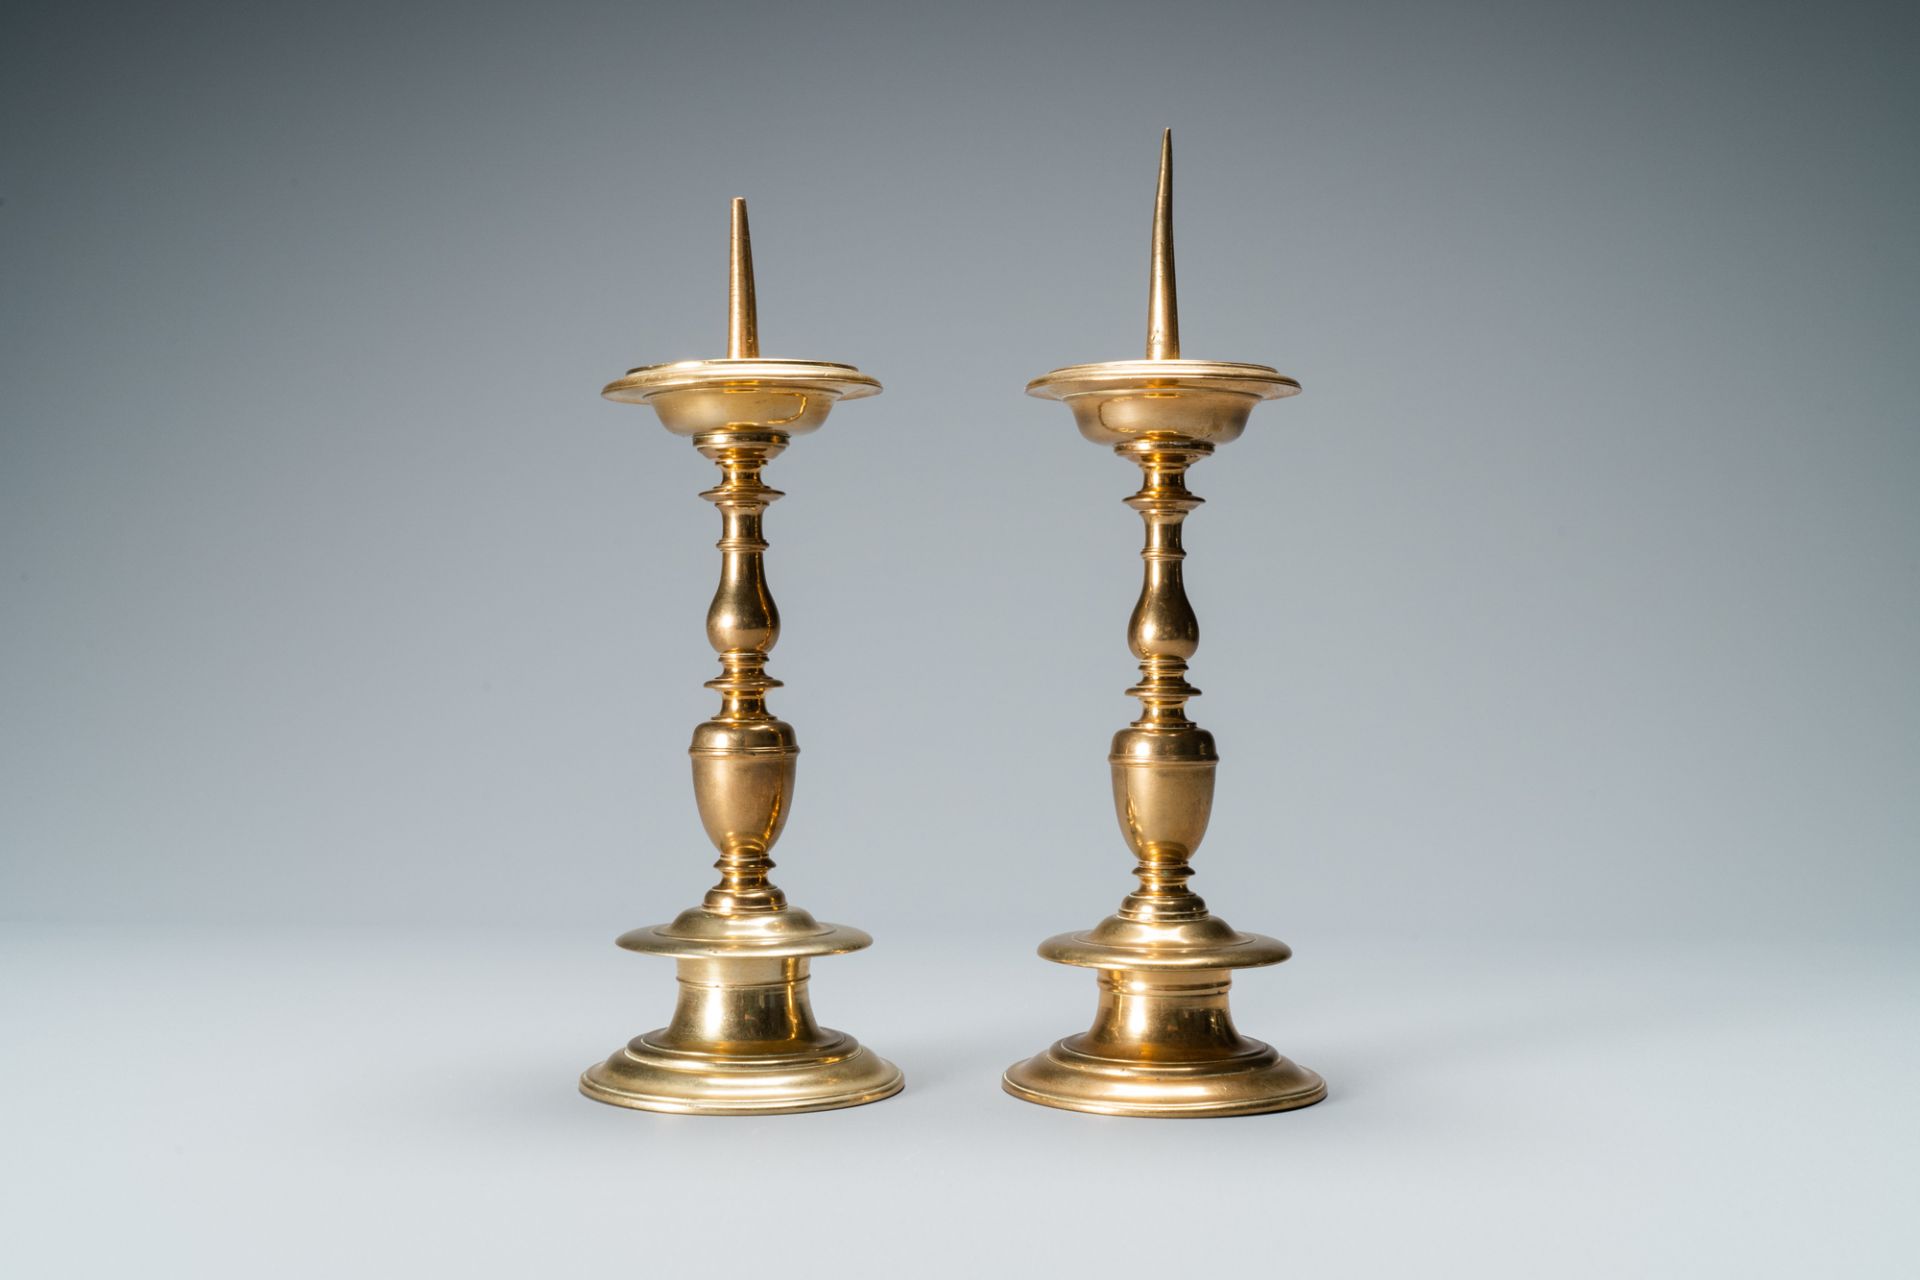 A pair of brass alloy candlesticks, Italy, 17th C. - Image 3 of 7